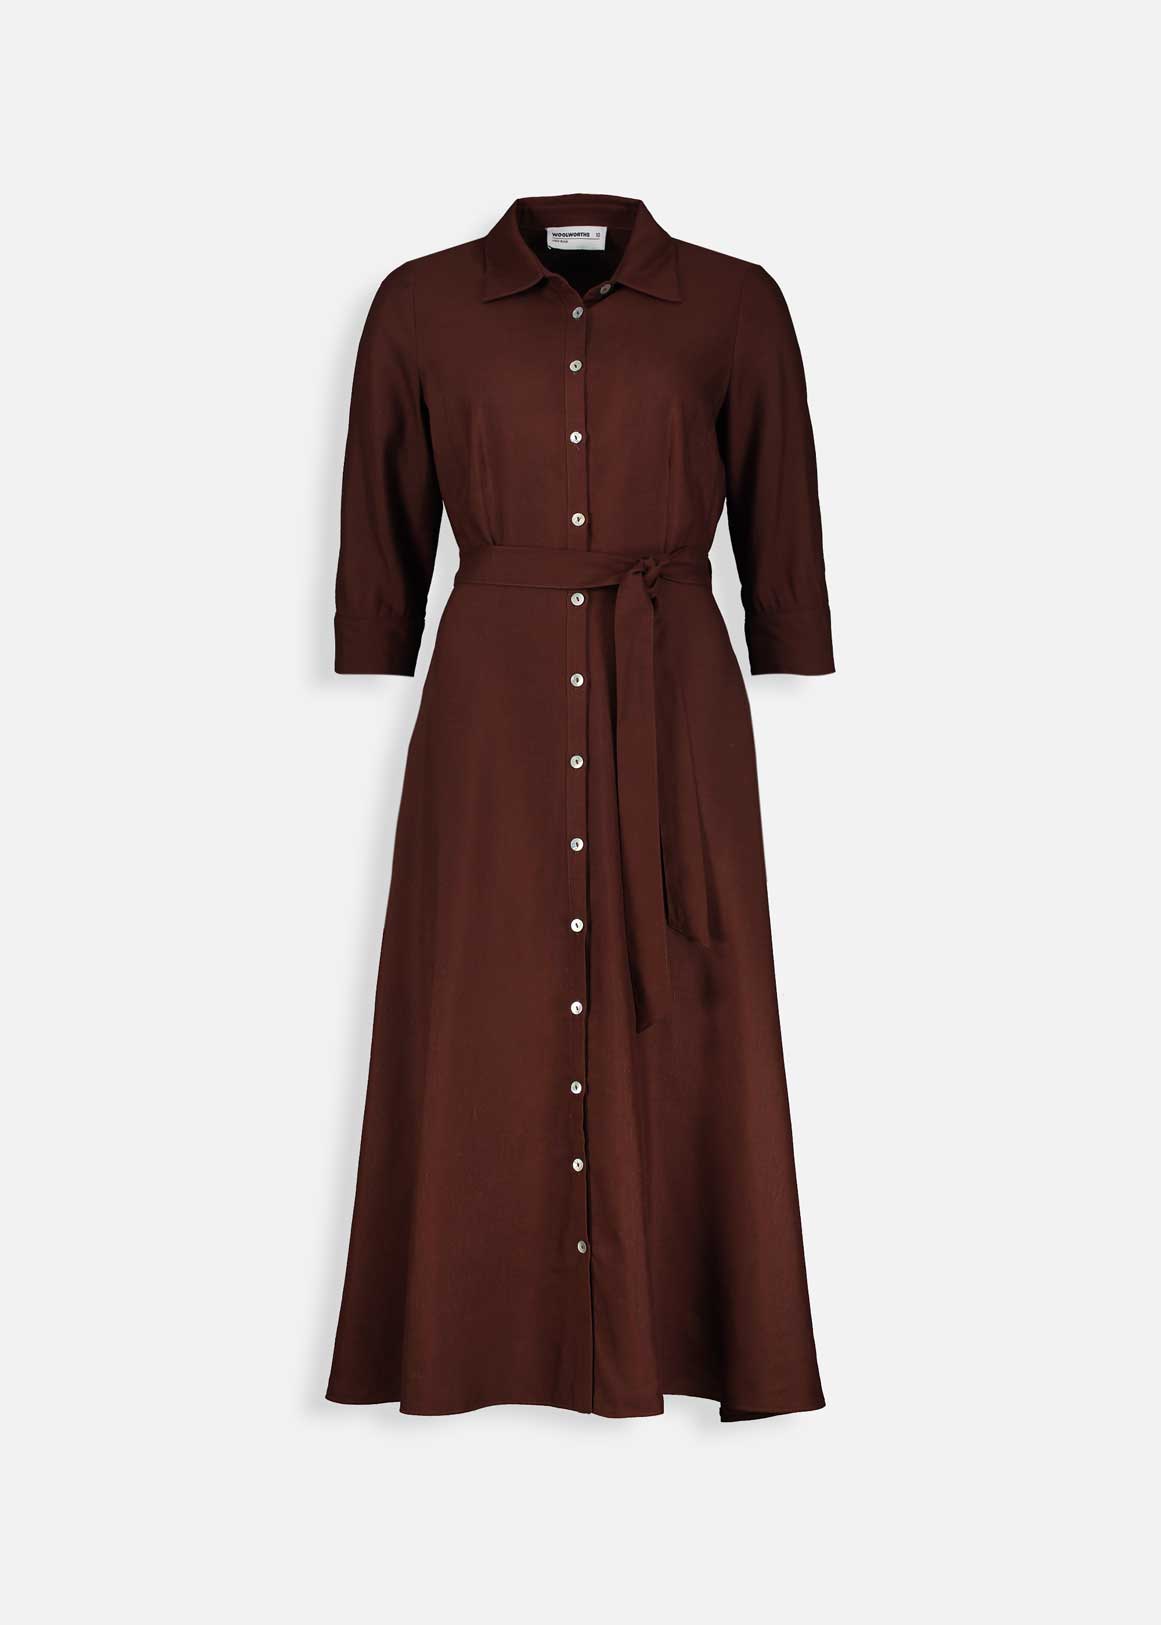 S22 LB SHIRT DRESS S - Woolworths Mauritius Online